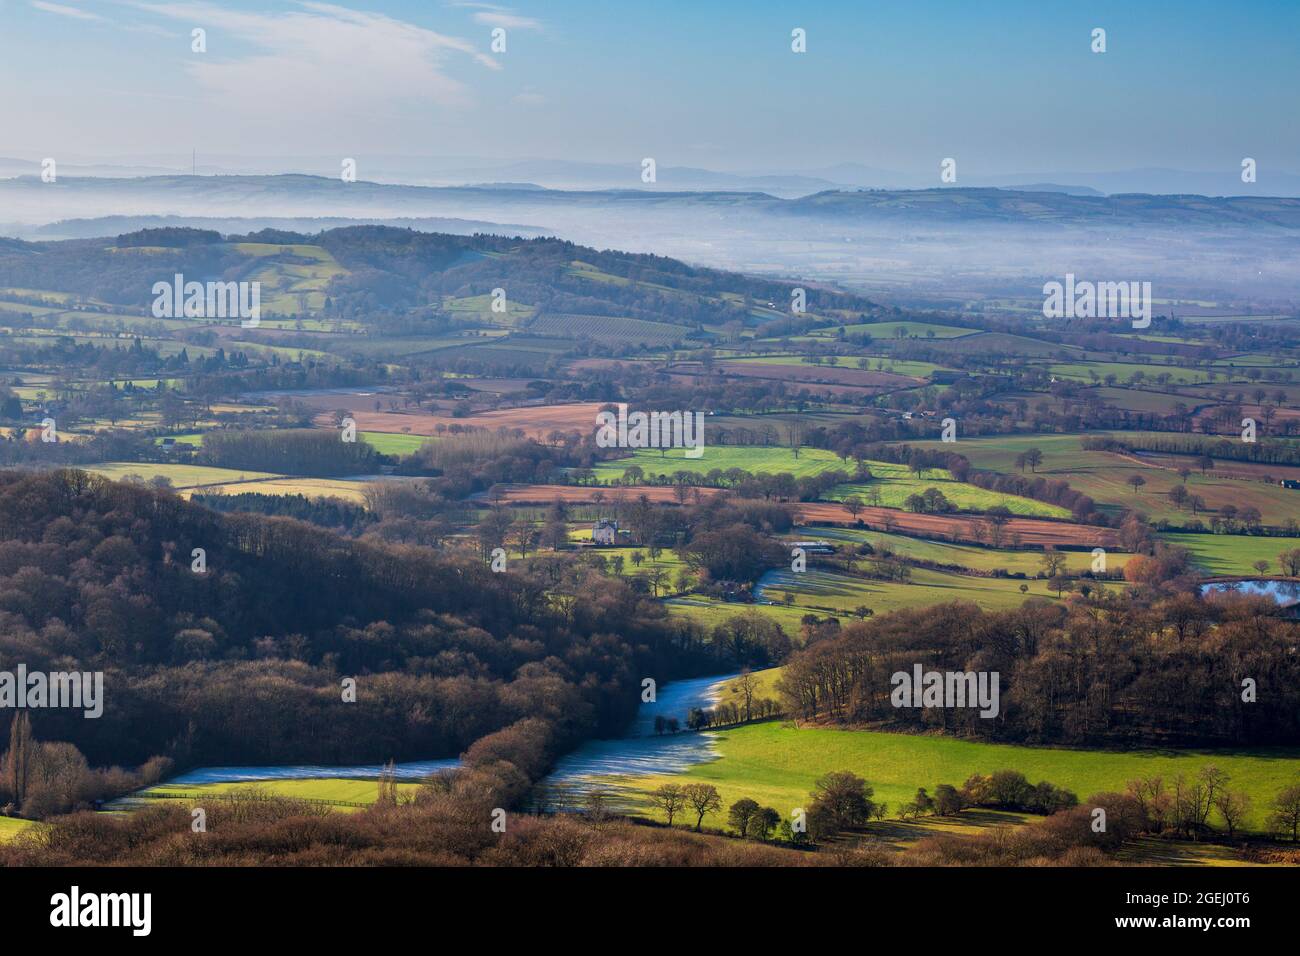 A winter view of the Herefordshire countryside from Worcestershire Beacon in the Malverns, Worcestershire, England Stock Photo